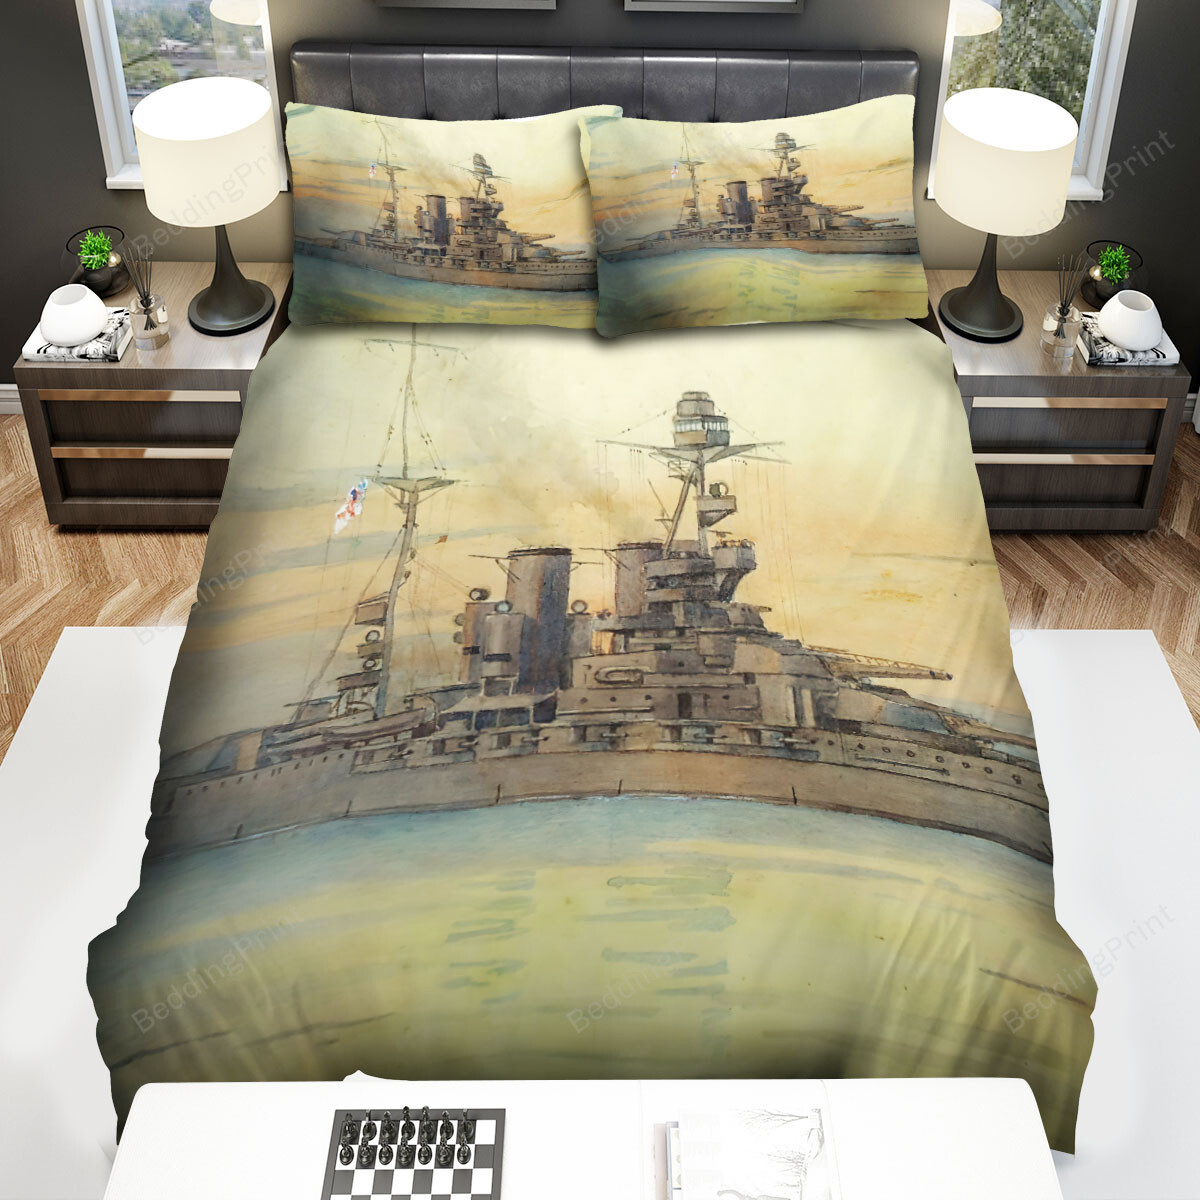 Military Weapon Ww2,  Queen Elizabeth Battleship Hms Bed Sheets Spread Duvet Cover Bedding Sets